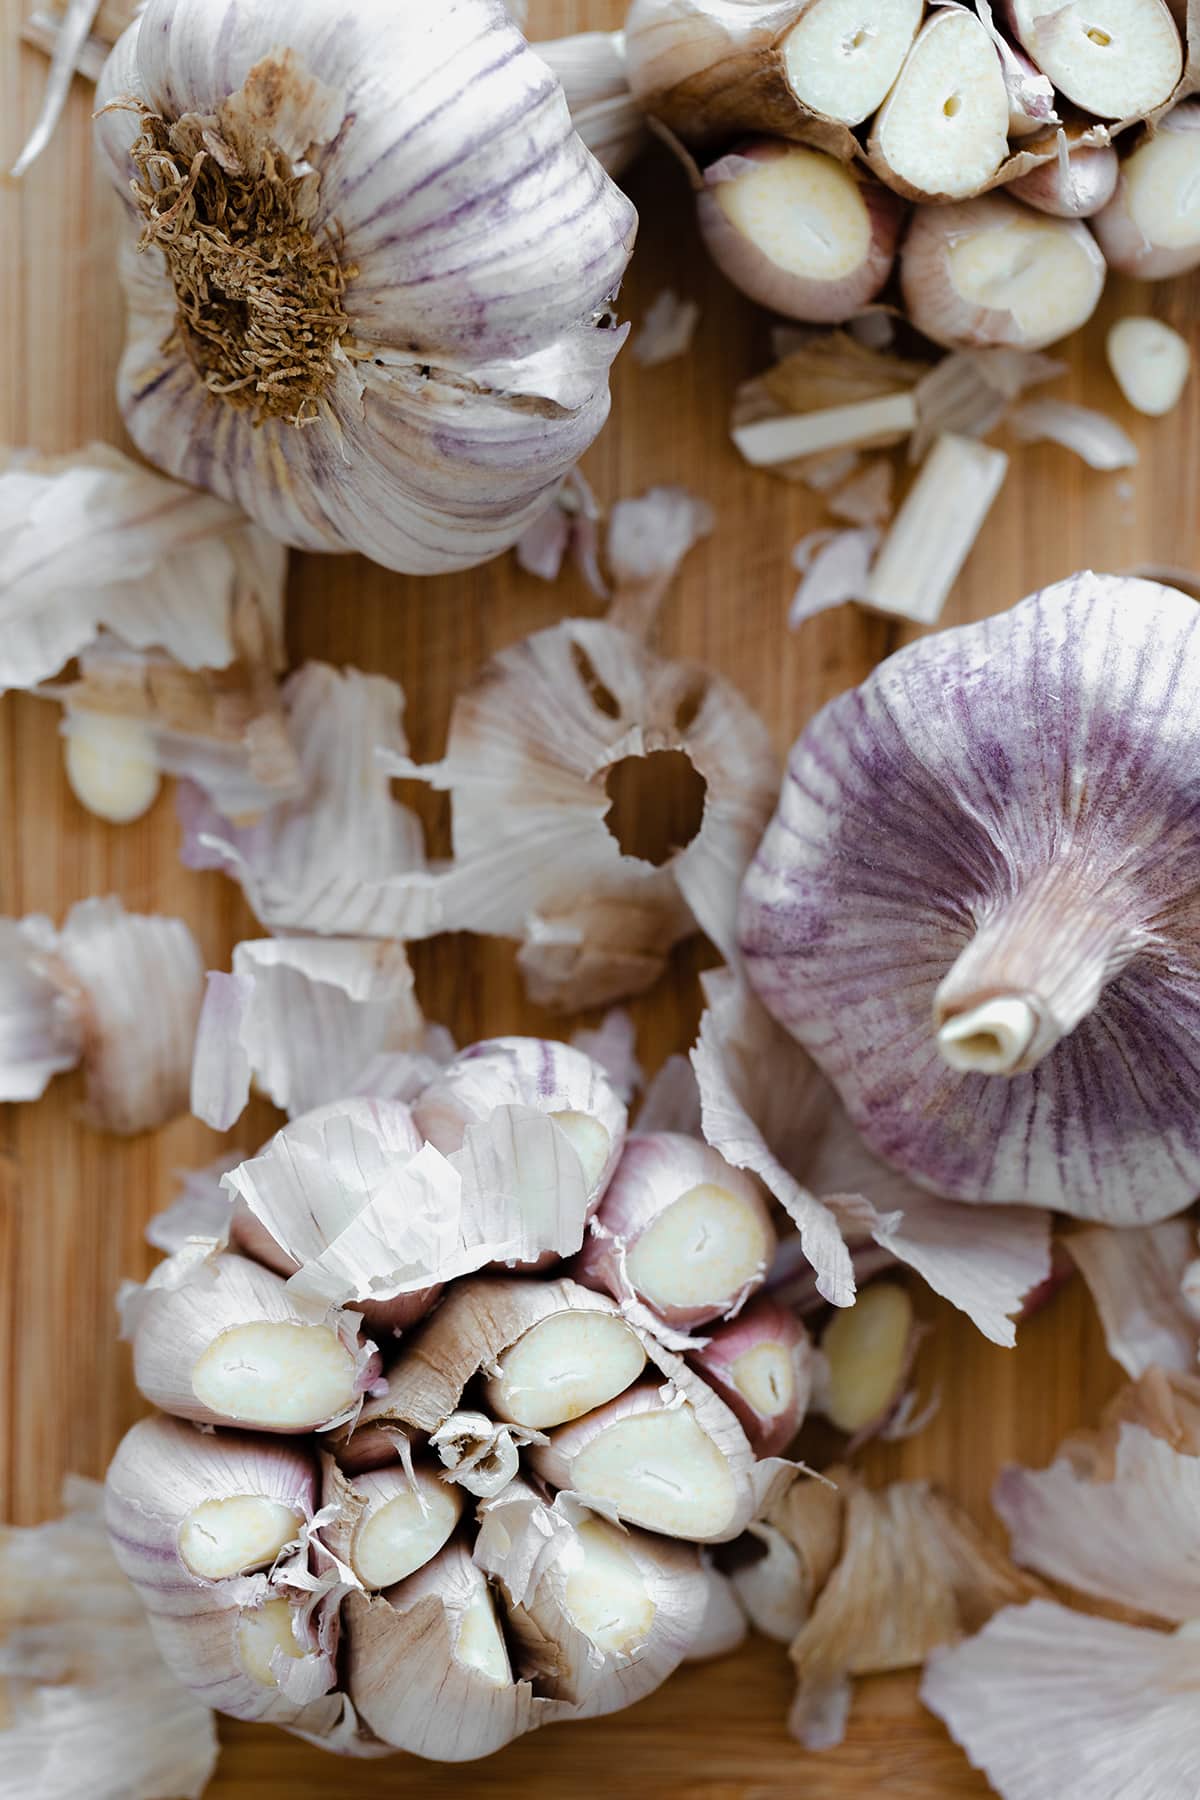 How to Roast Garlic in the Oven